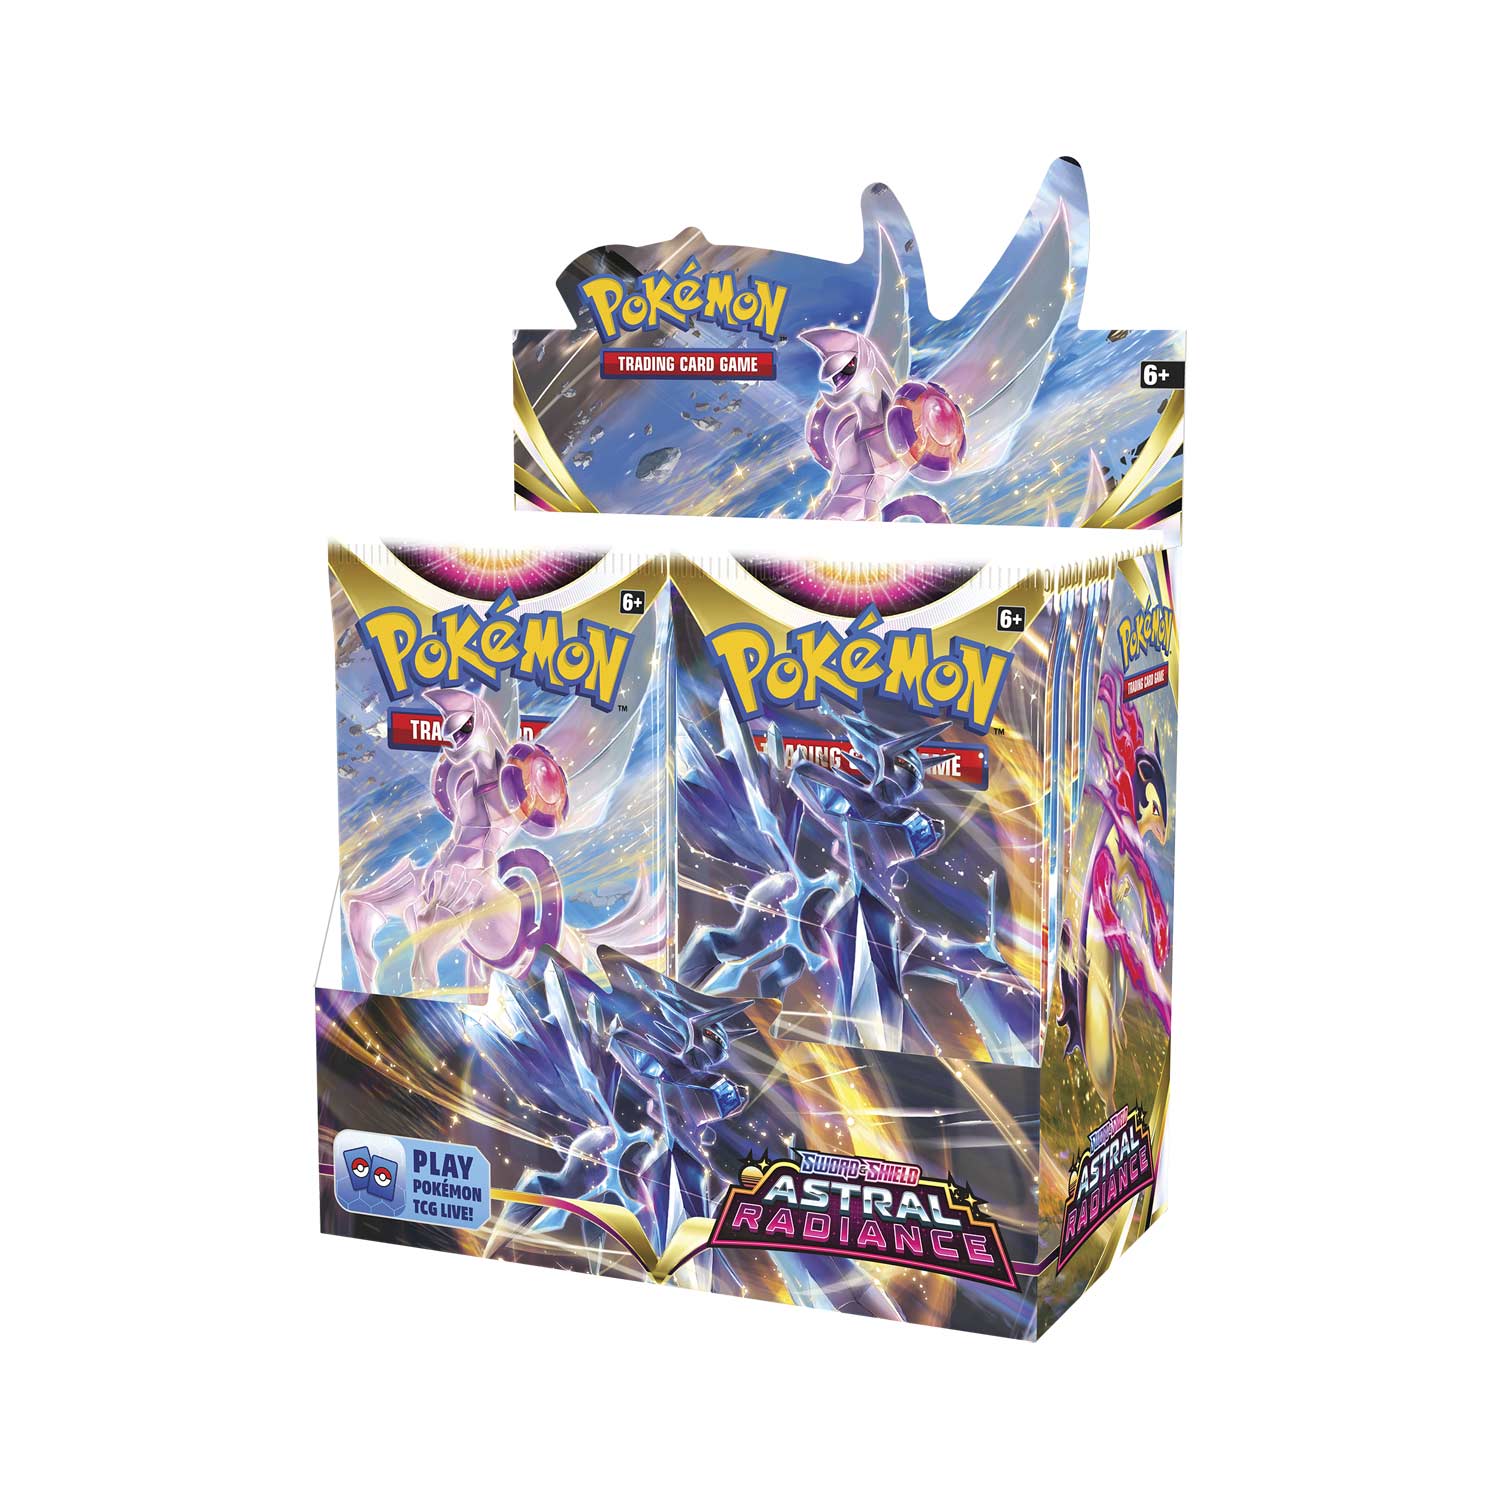 Pokemon: ASTRAL RADIANCE BOOSTER BOX (that’s 36 packs)